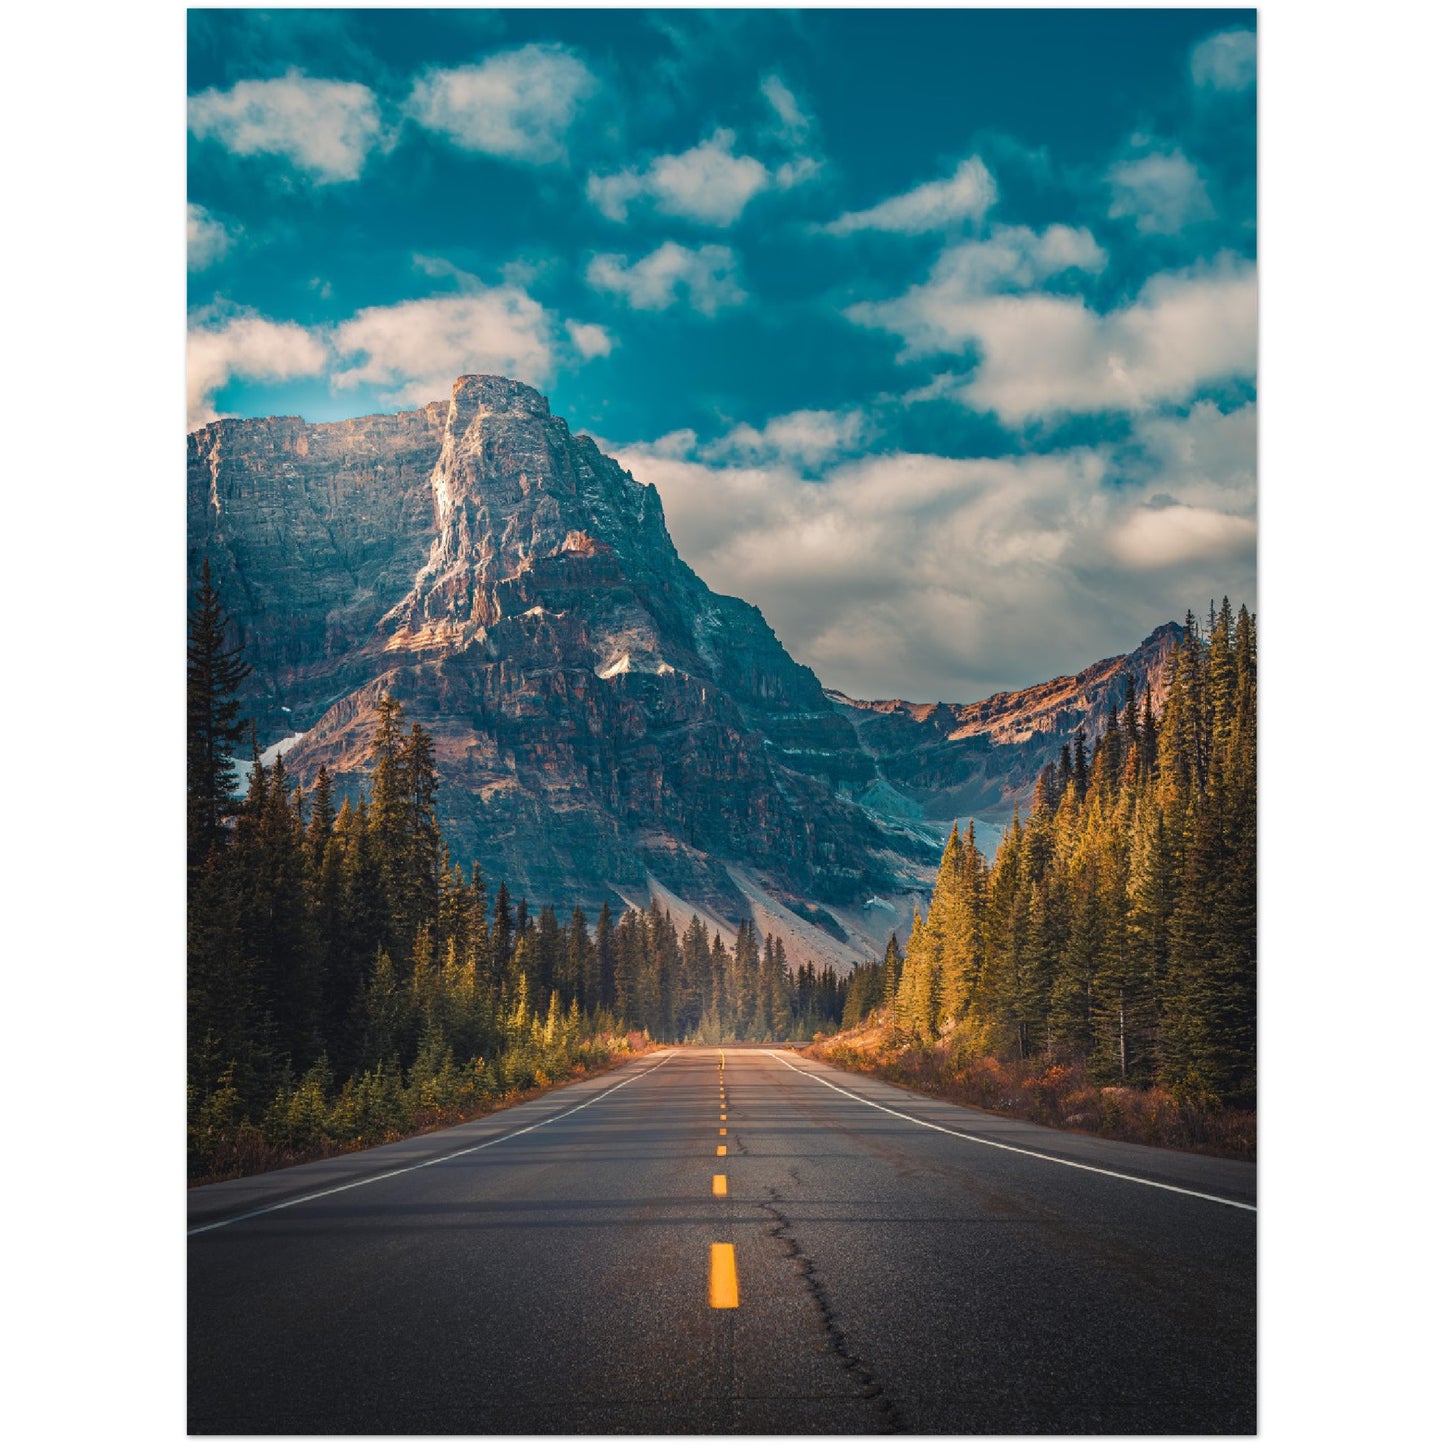 The Road Best Traveled - Premium Matte Paper Poster